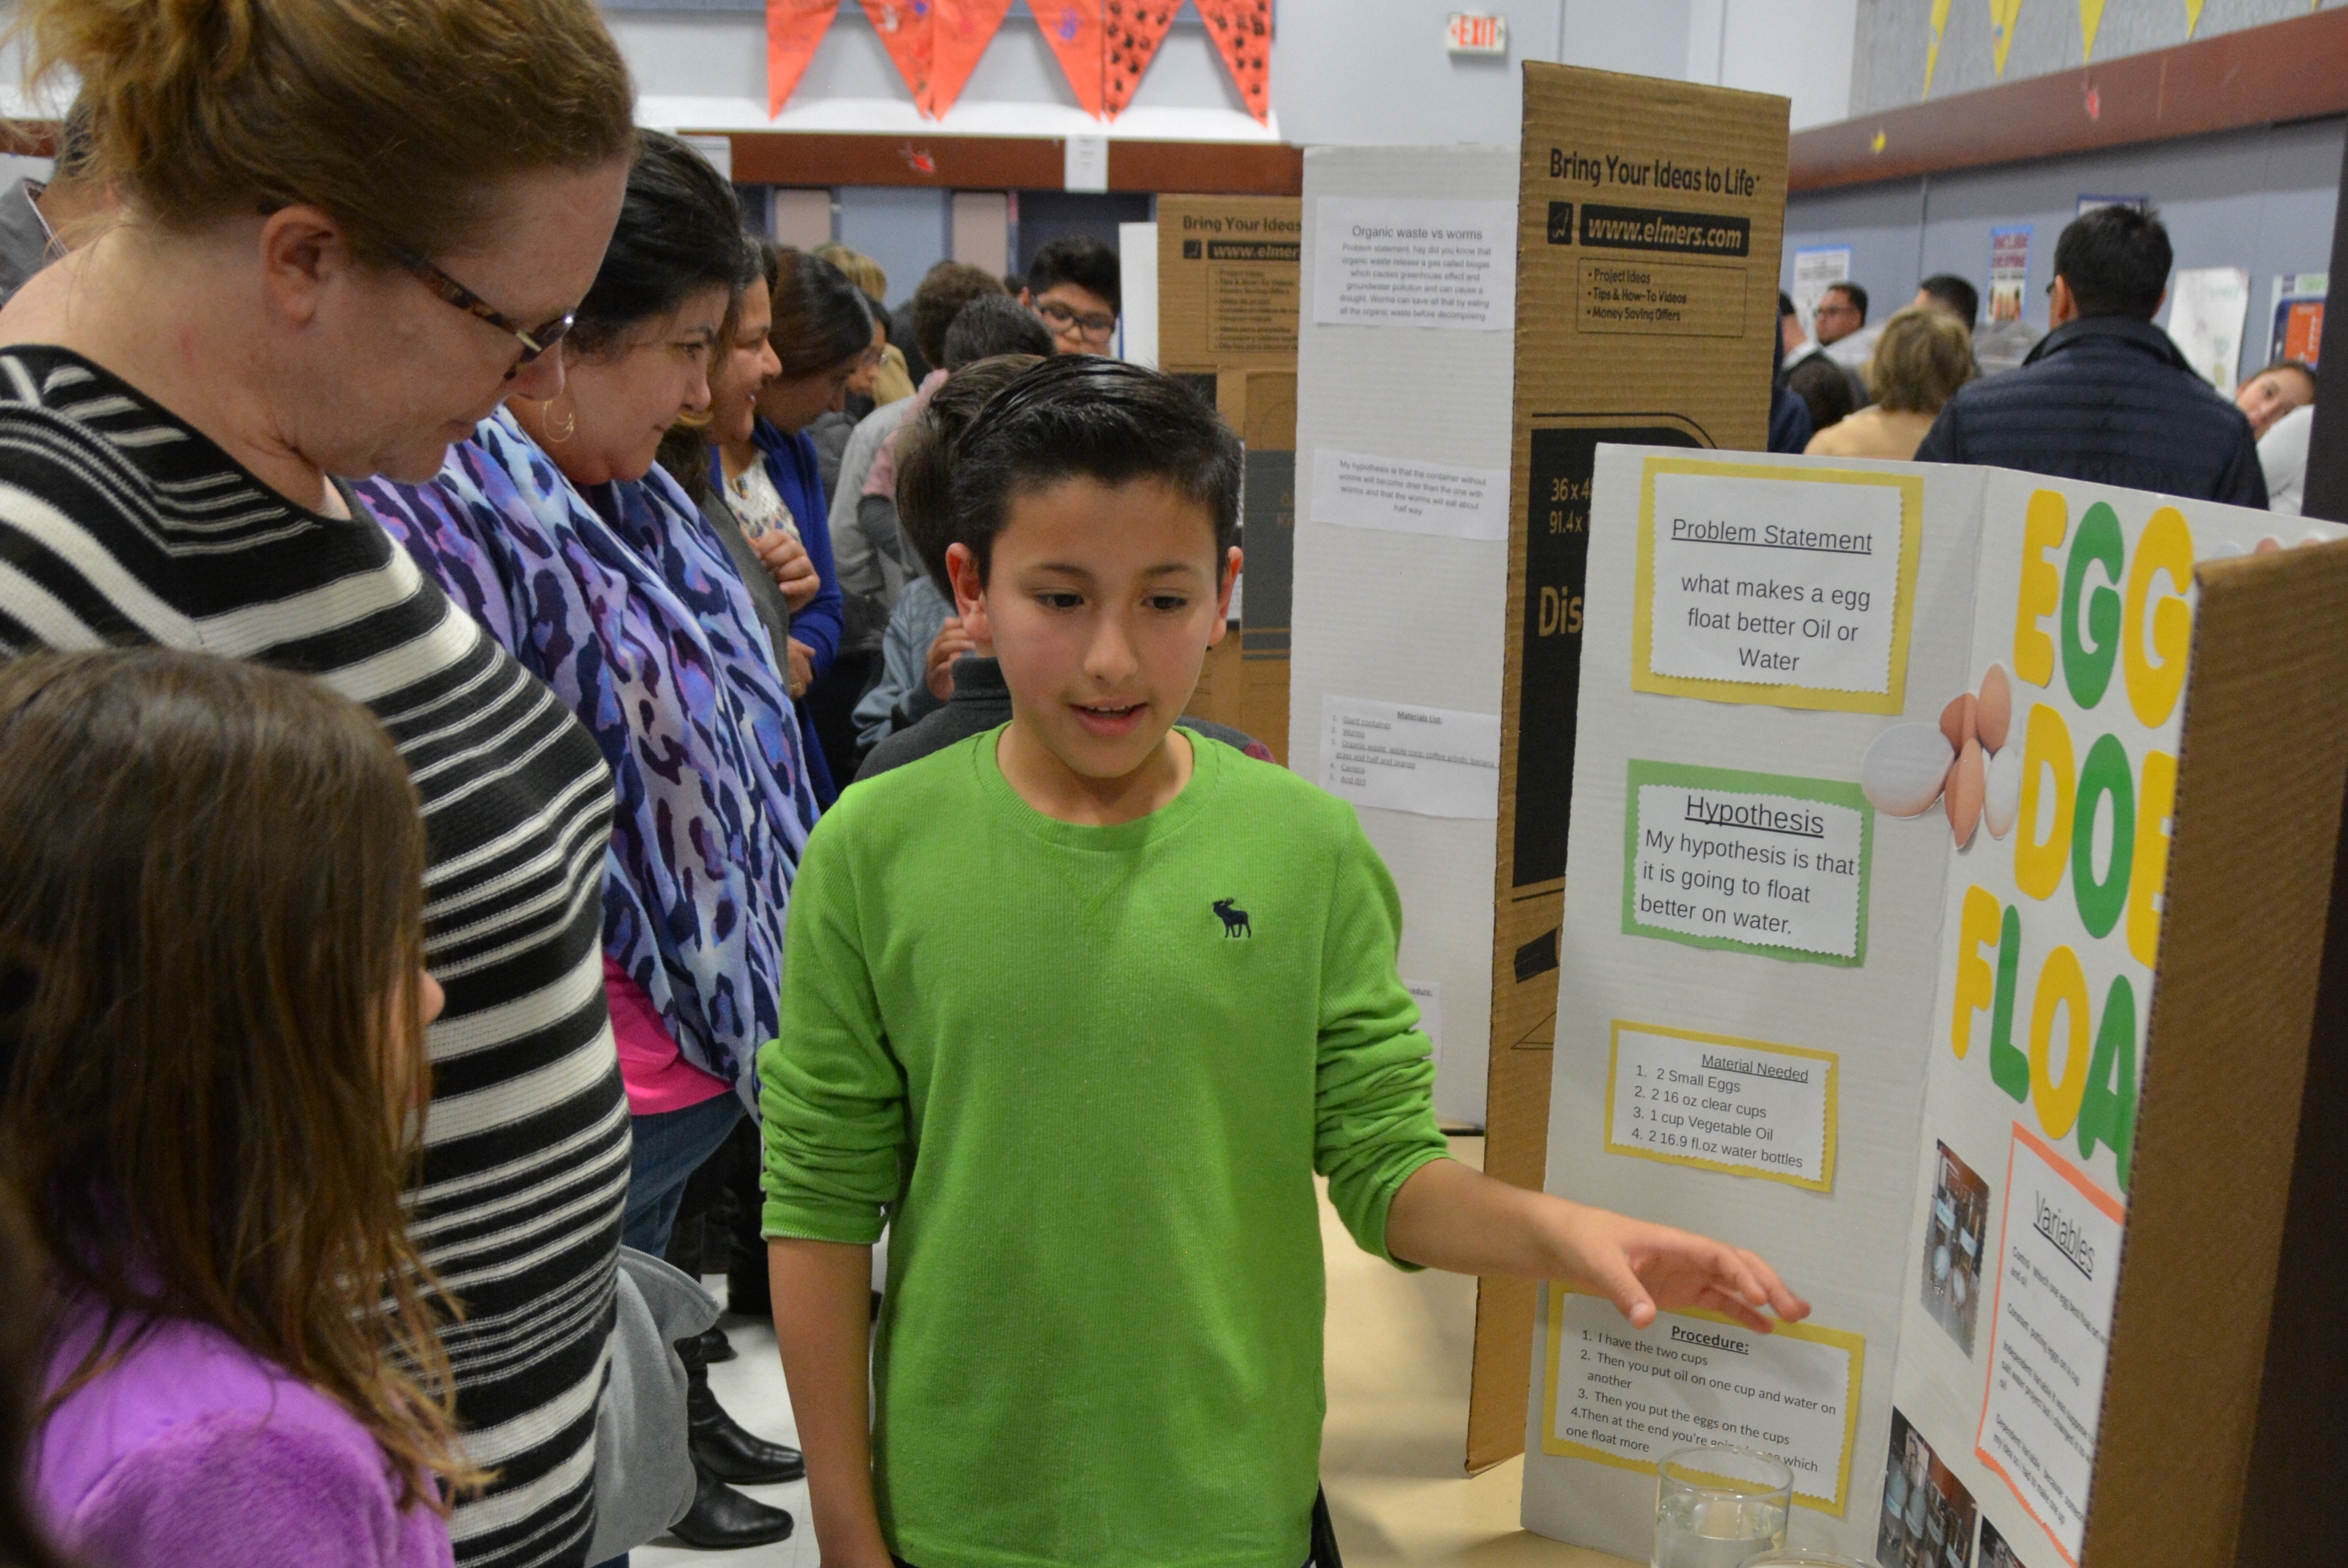 Our Explorer scientists were amazing during our annual science fair. They were prepared, well-spoken, and thrilled to share their learning with the community.